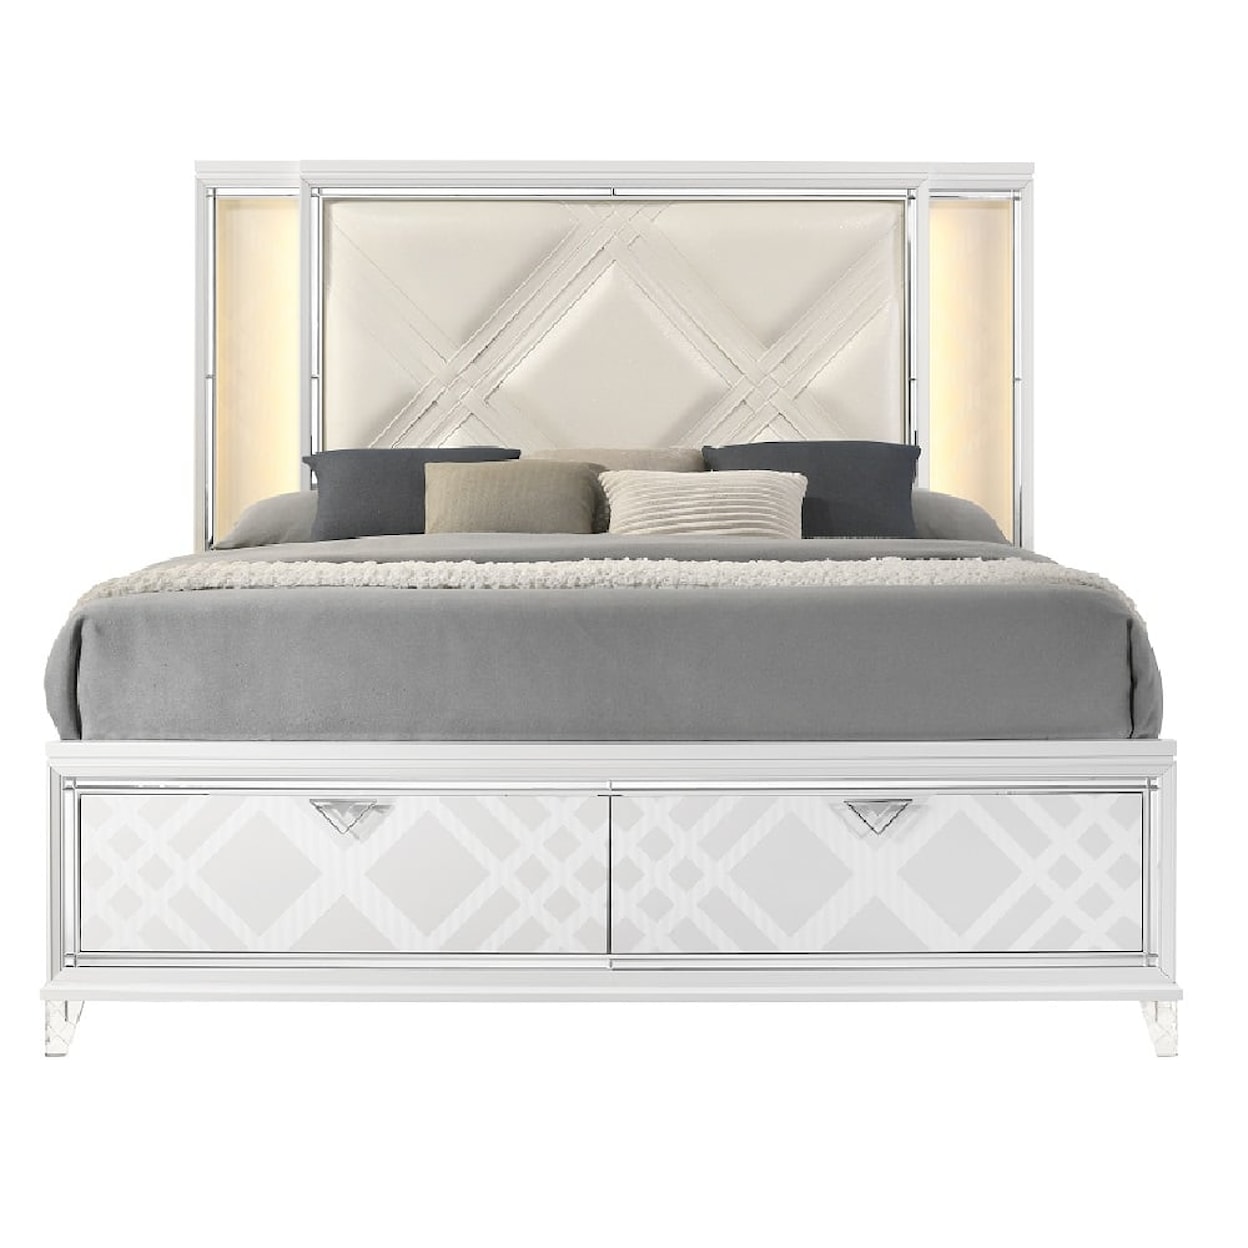 Acme Furniture Skylar Queen Bed W/Led & Storage